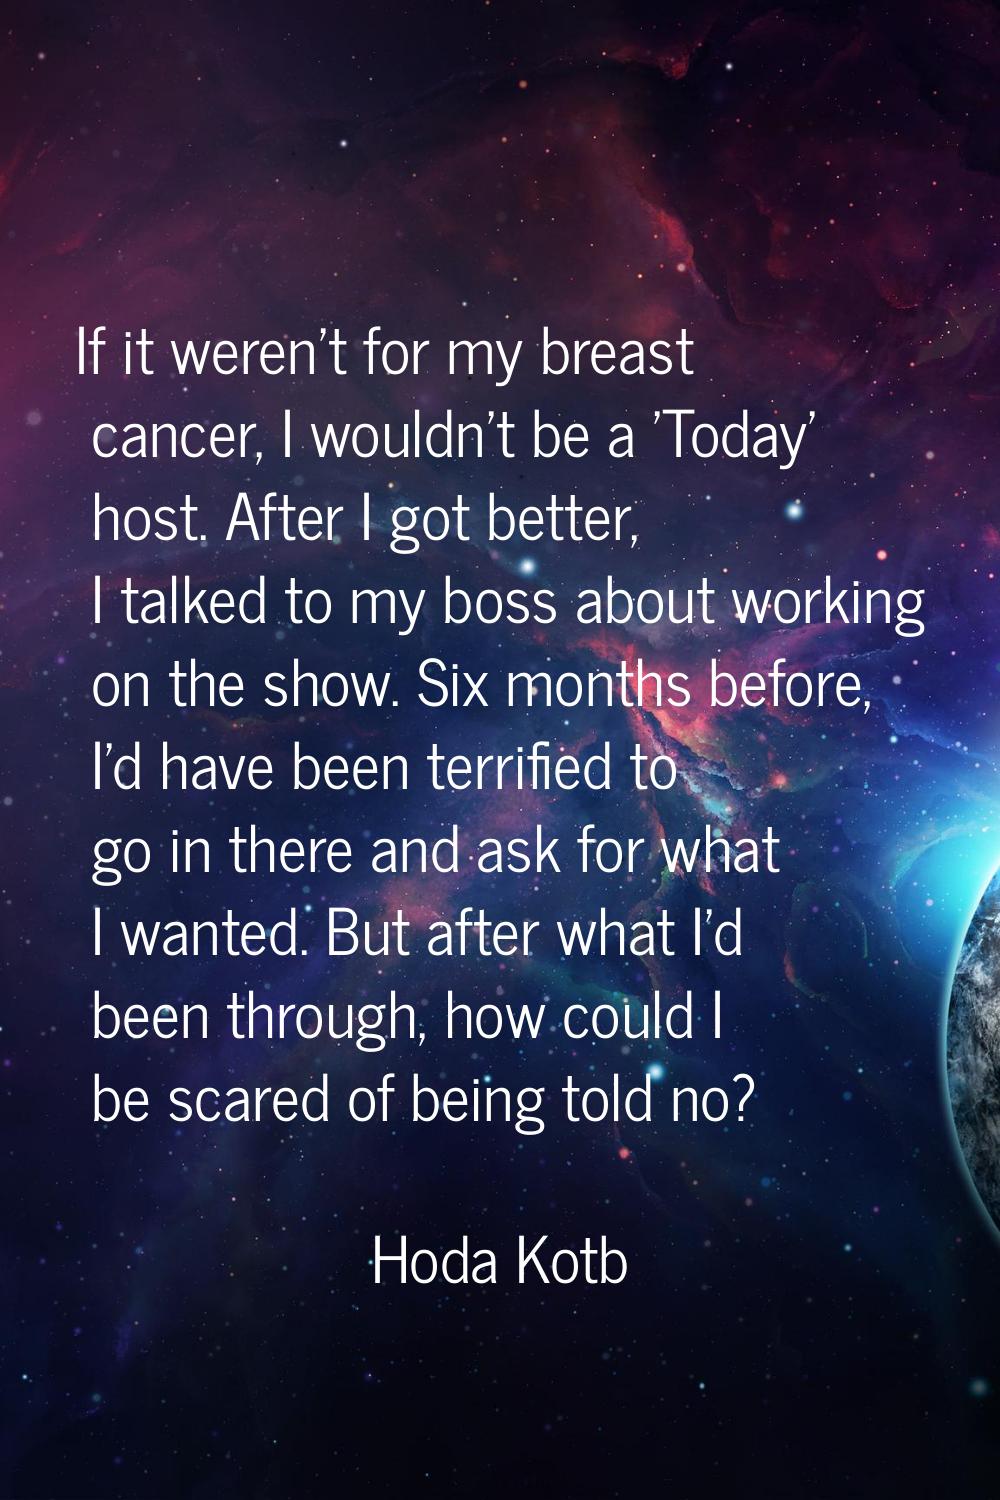 If it weren't for my breast cancer, I wouldn't be a 'Today' host. After I got better, I talked to m